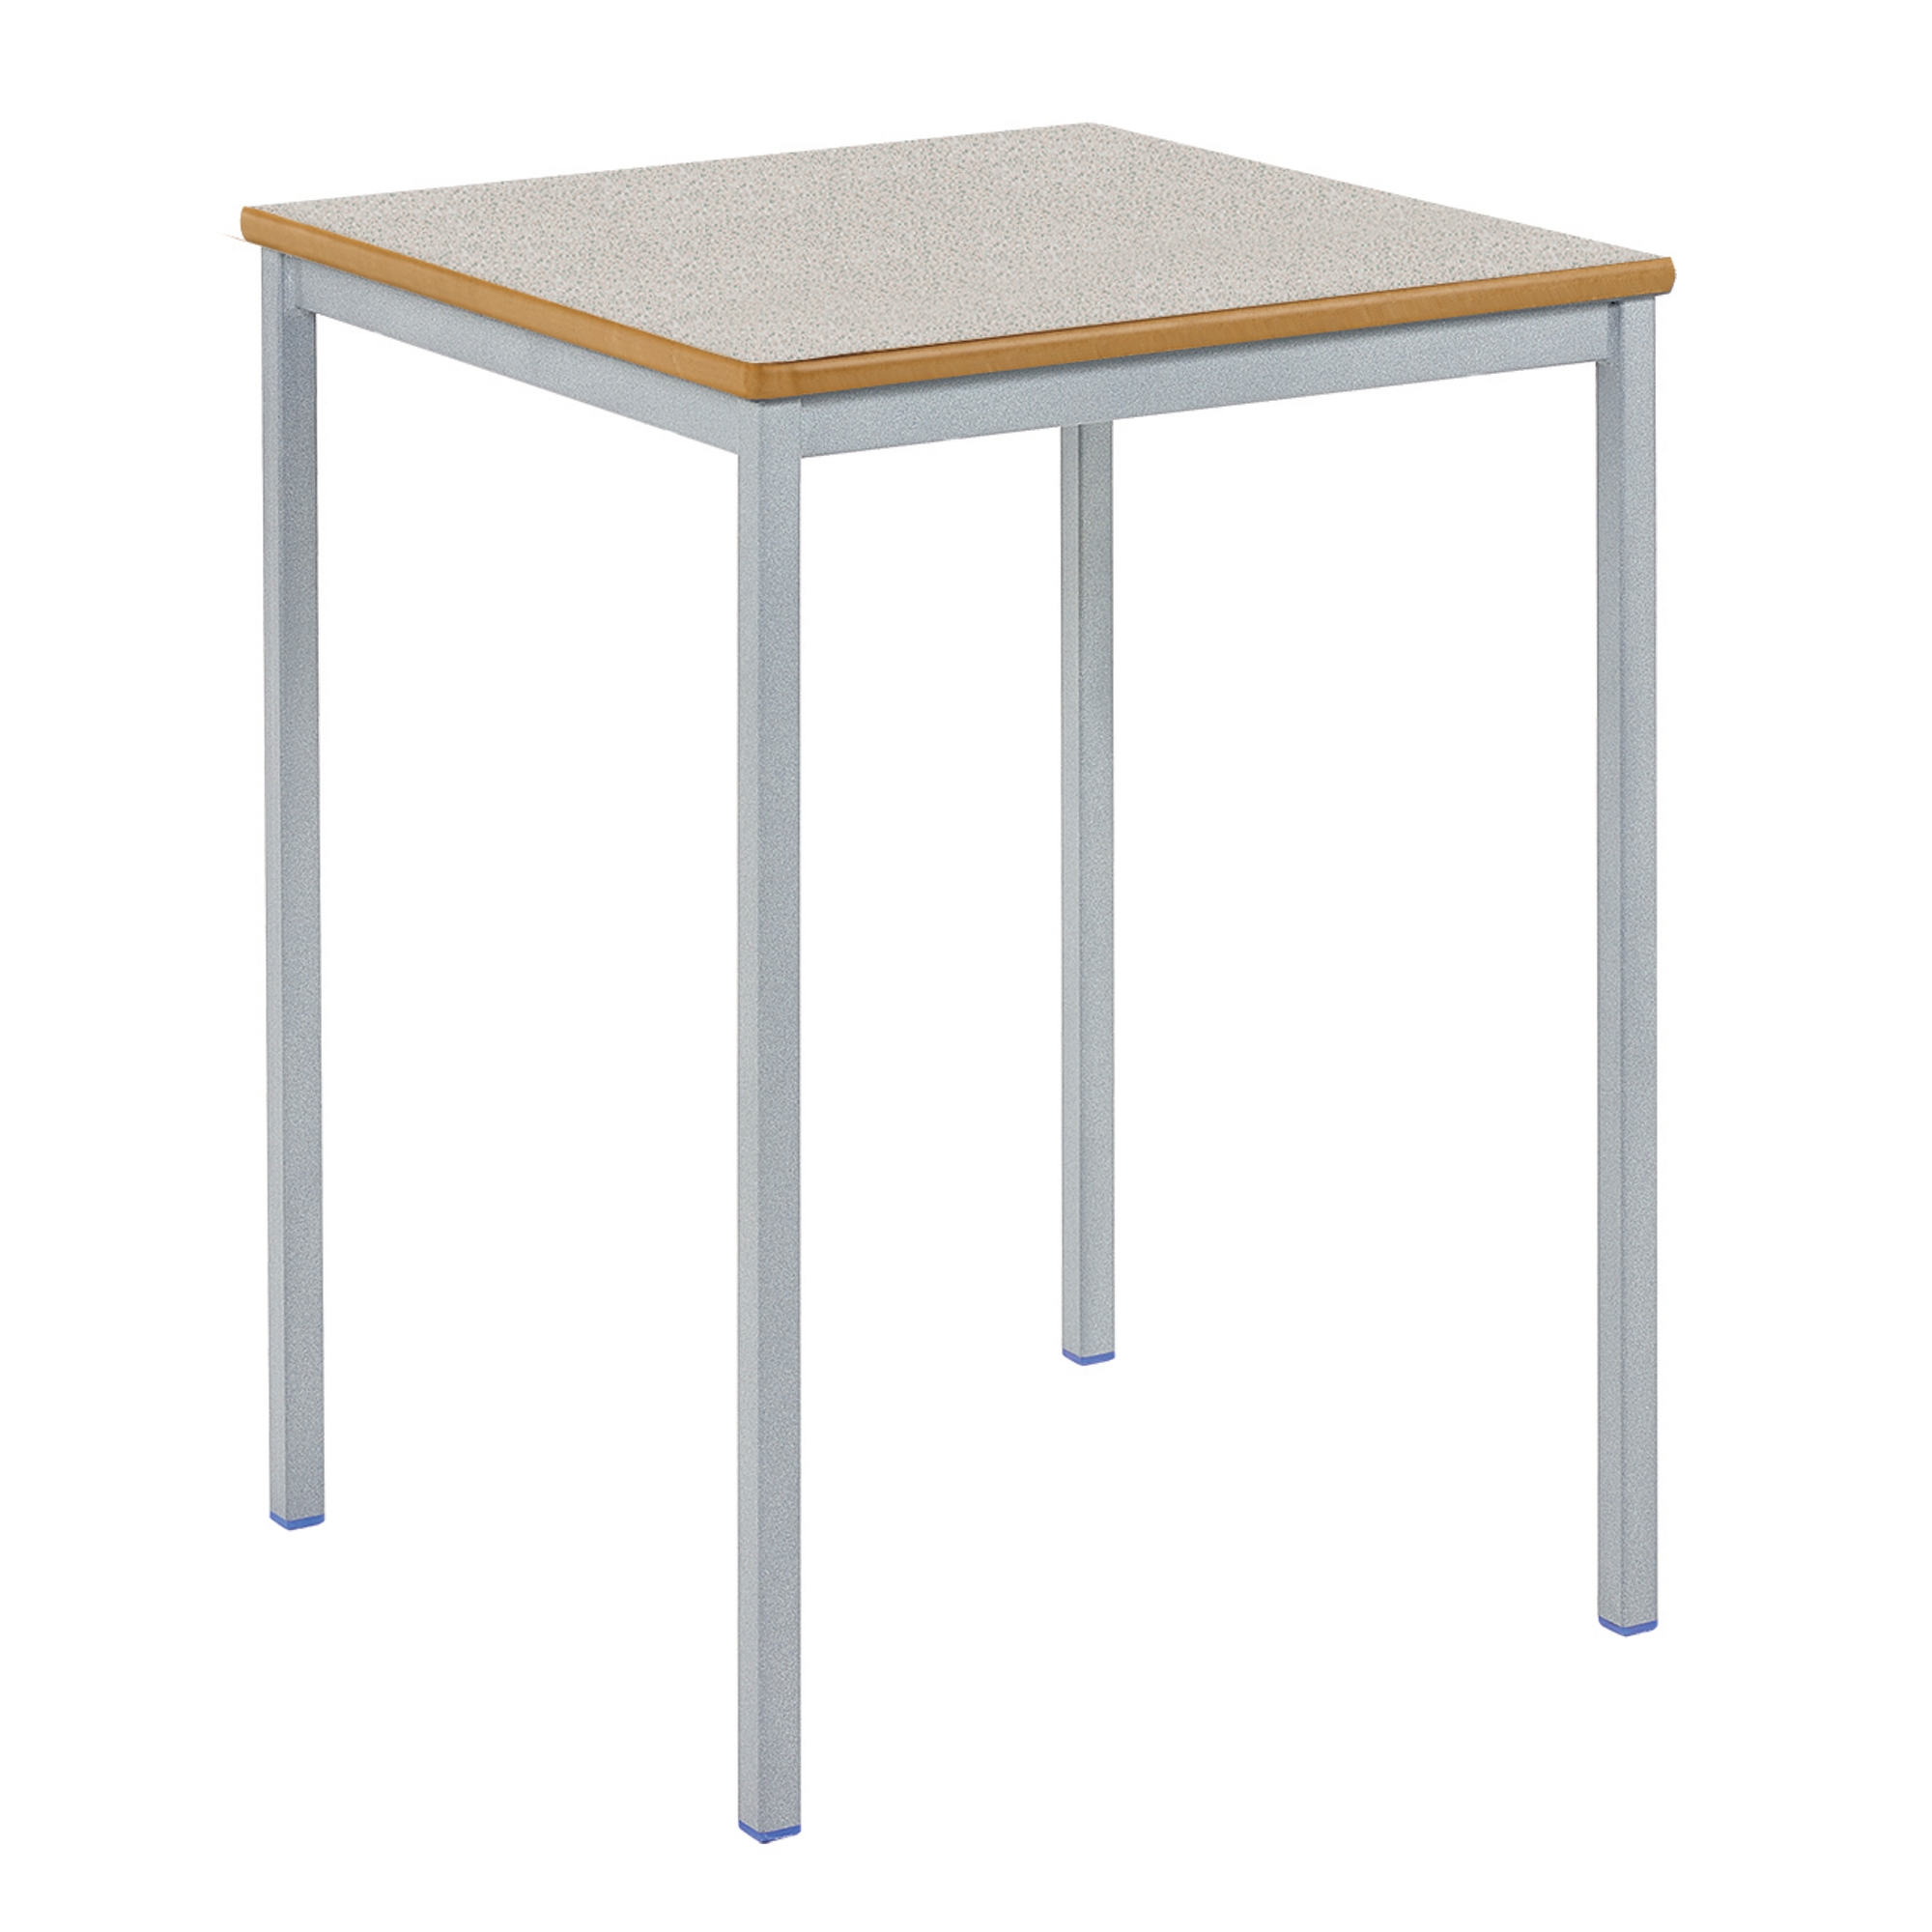 Classmates Square Fully Welded Classroom Table - 600 x 600 x 640mm - Ailsa